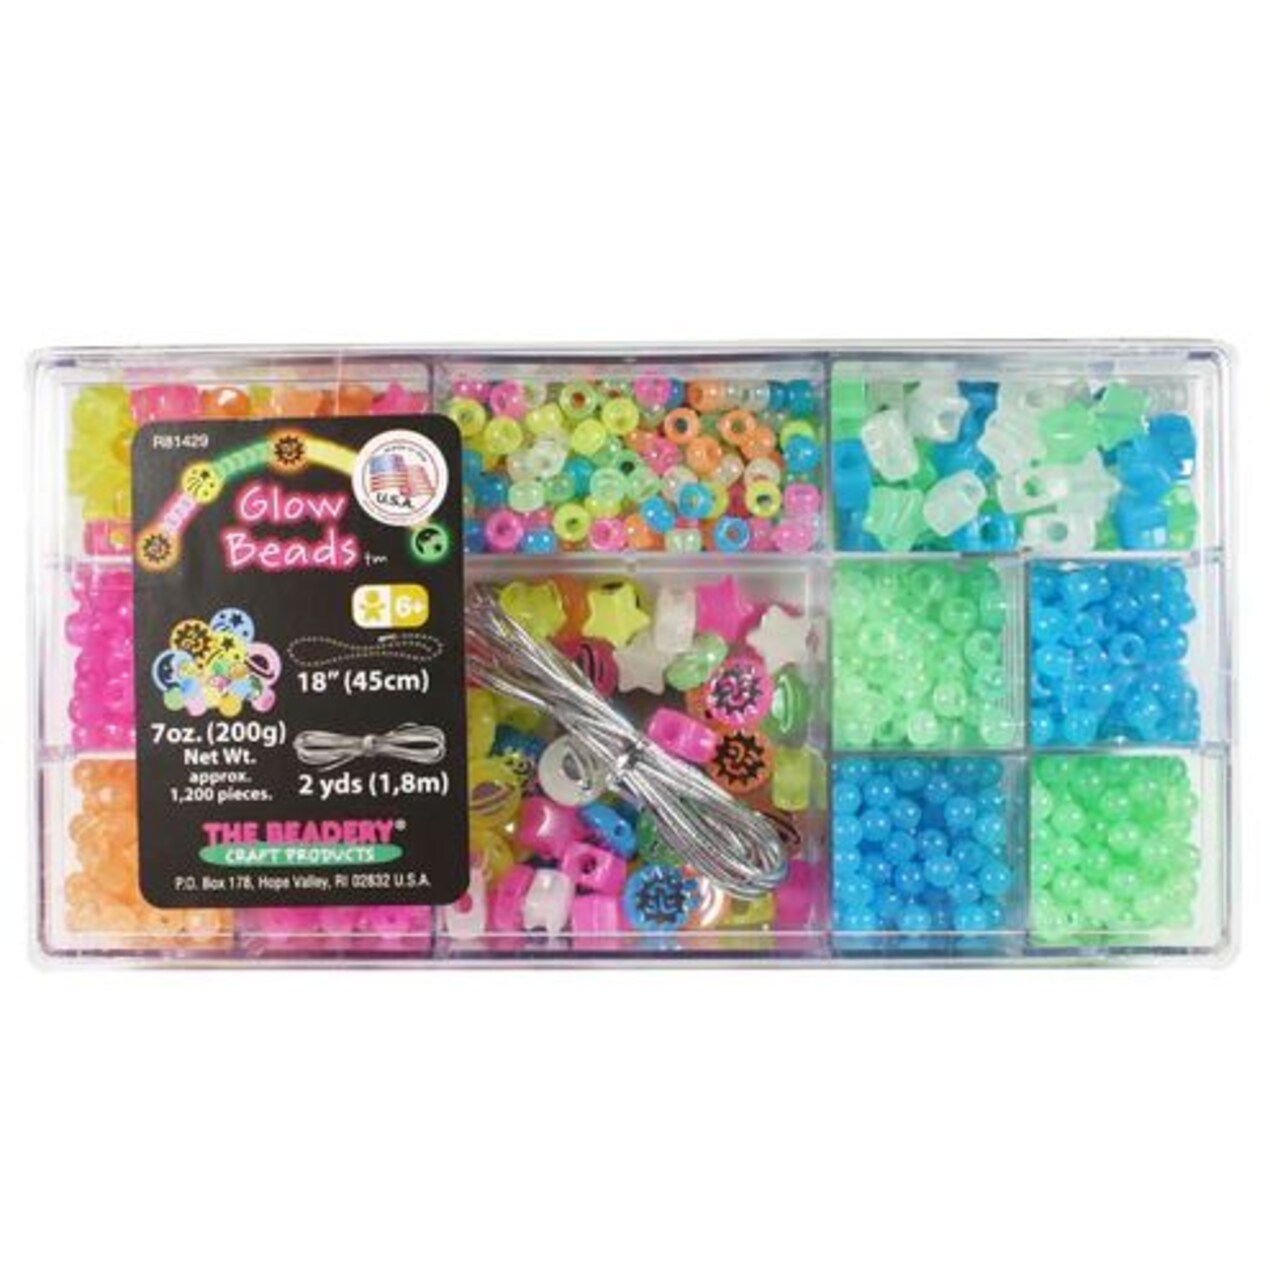 Glow Beads Box by The Beadery